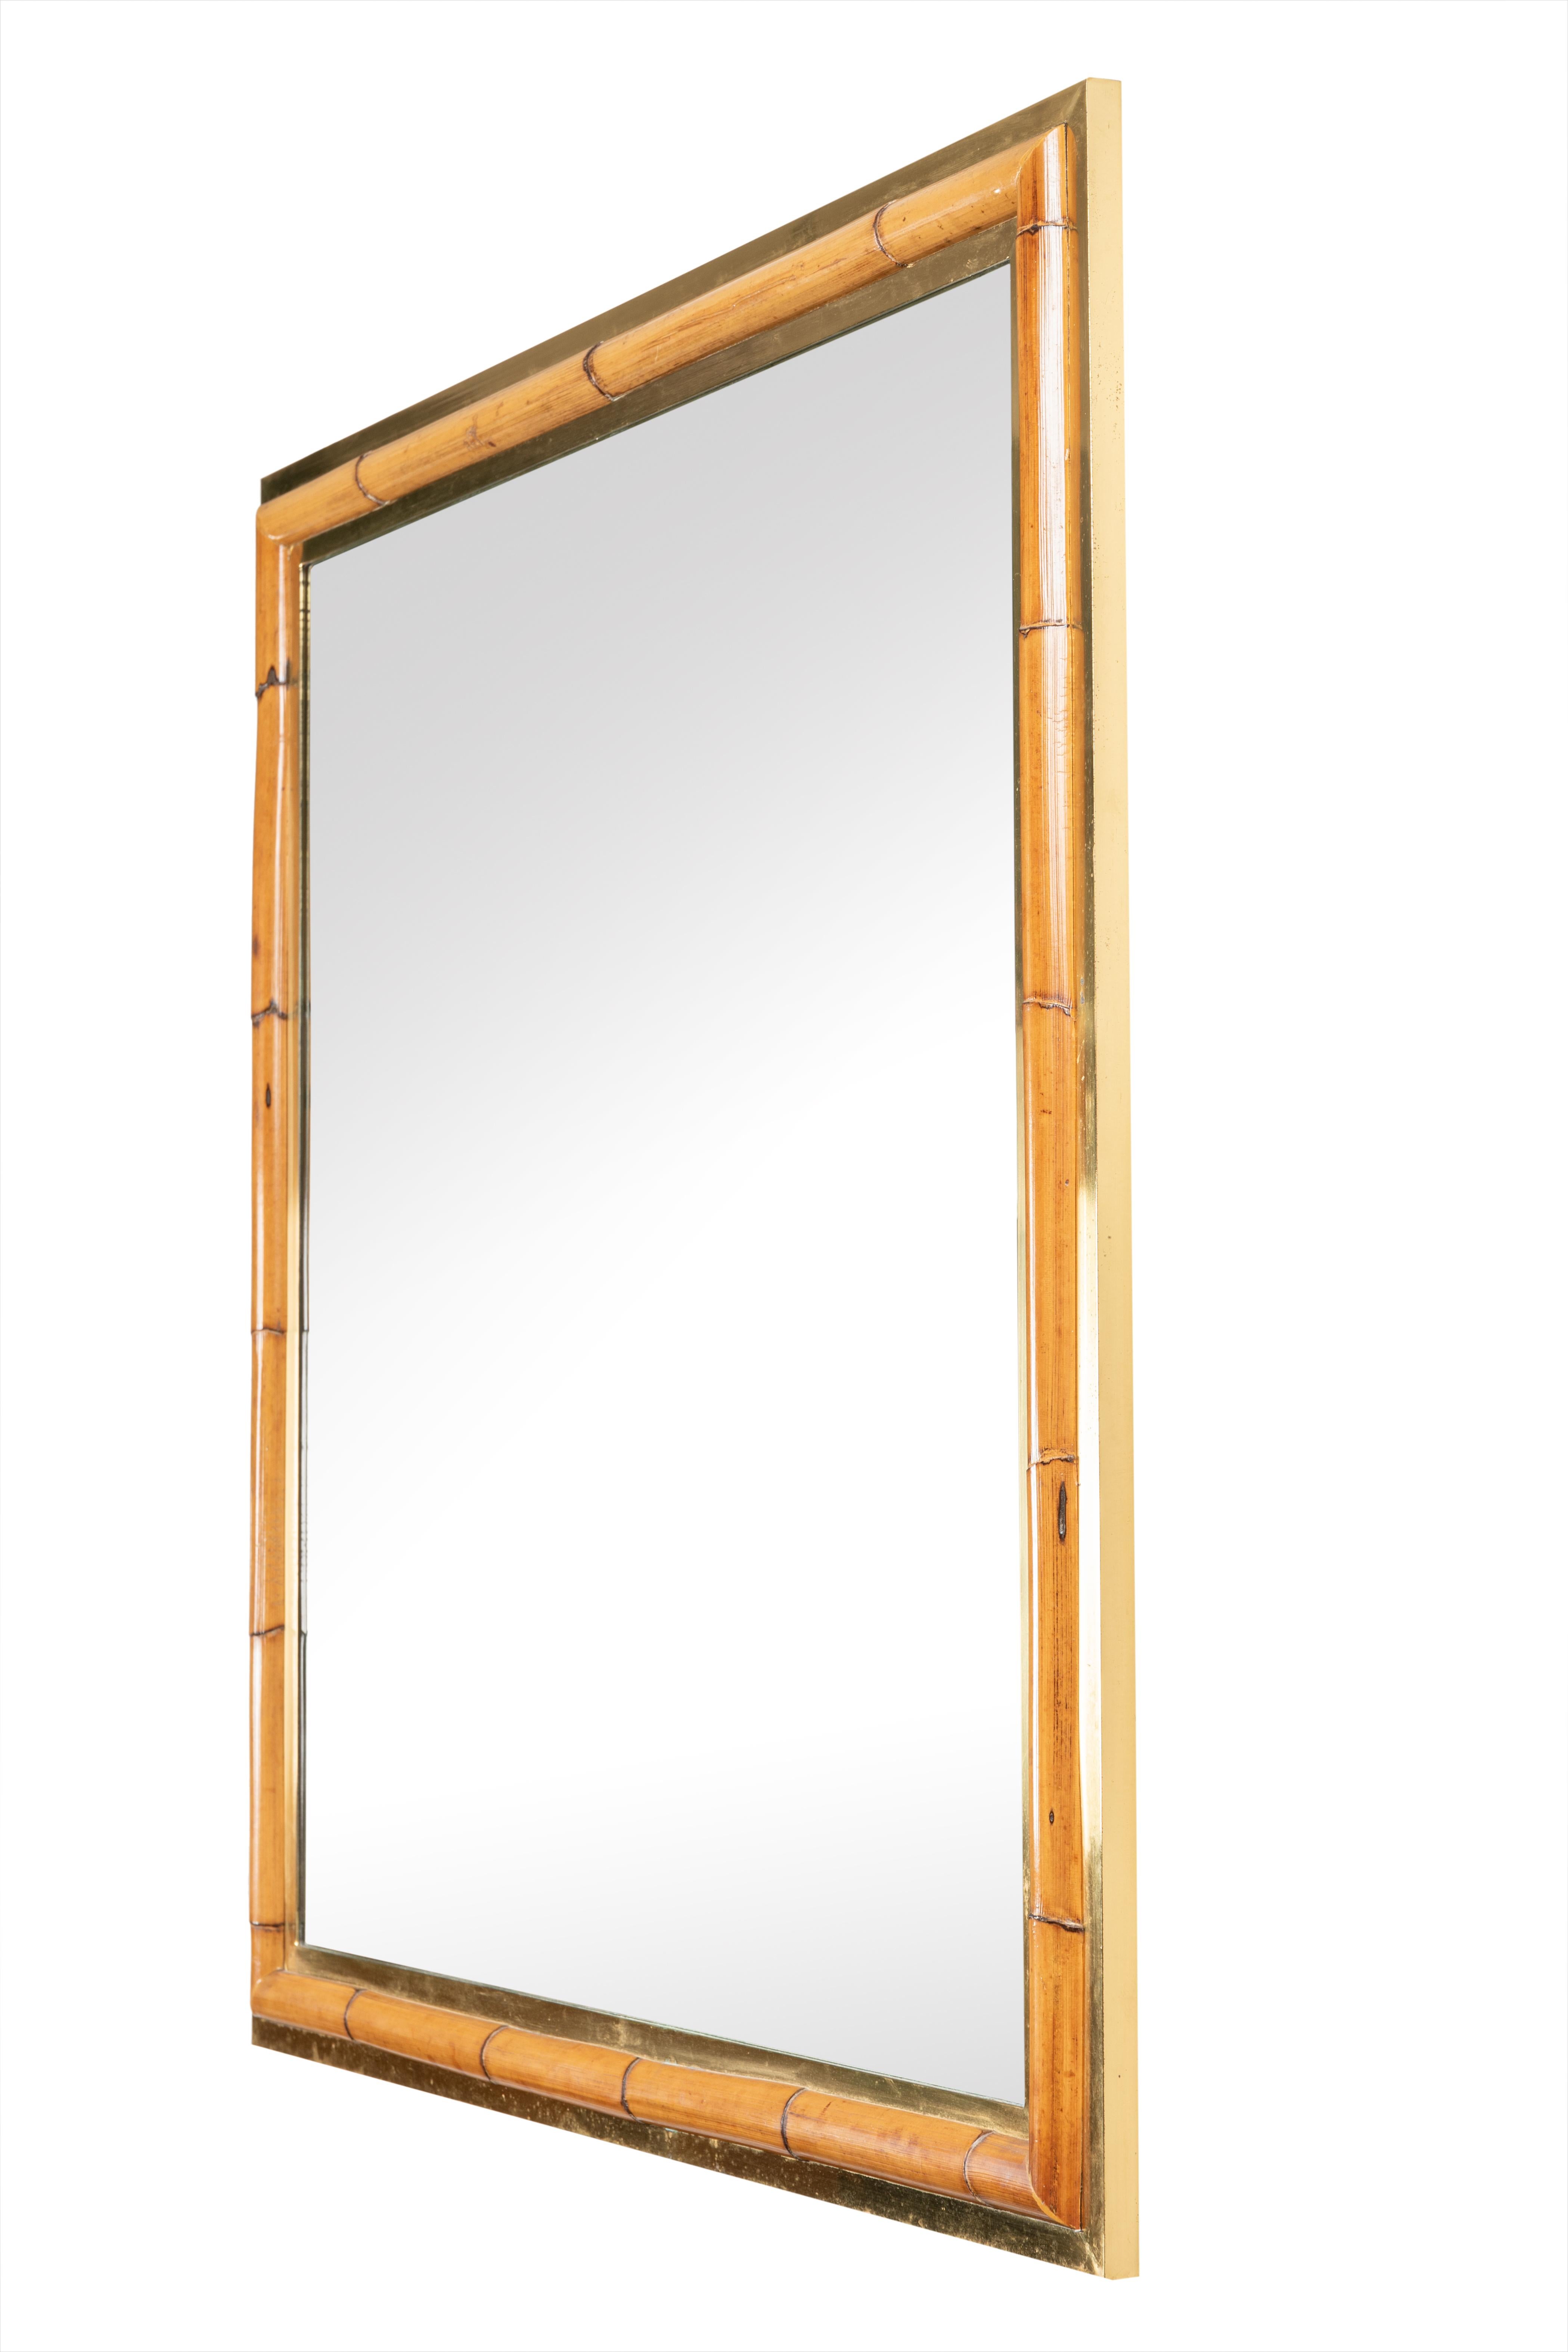 A square brass and bamboo framed mirror,
Italy, 1970s.

Measures: Height 39.4 in., 100 cm
Width 39.4 in., 100 cm
Depth 1.4 in., 3.5 cm